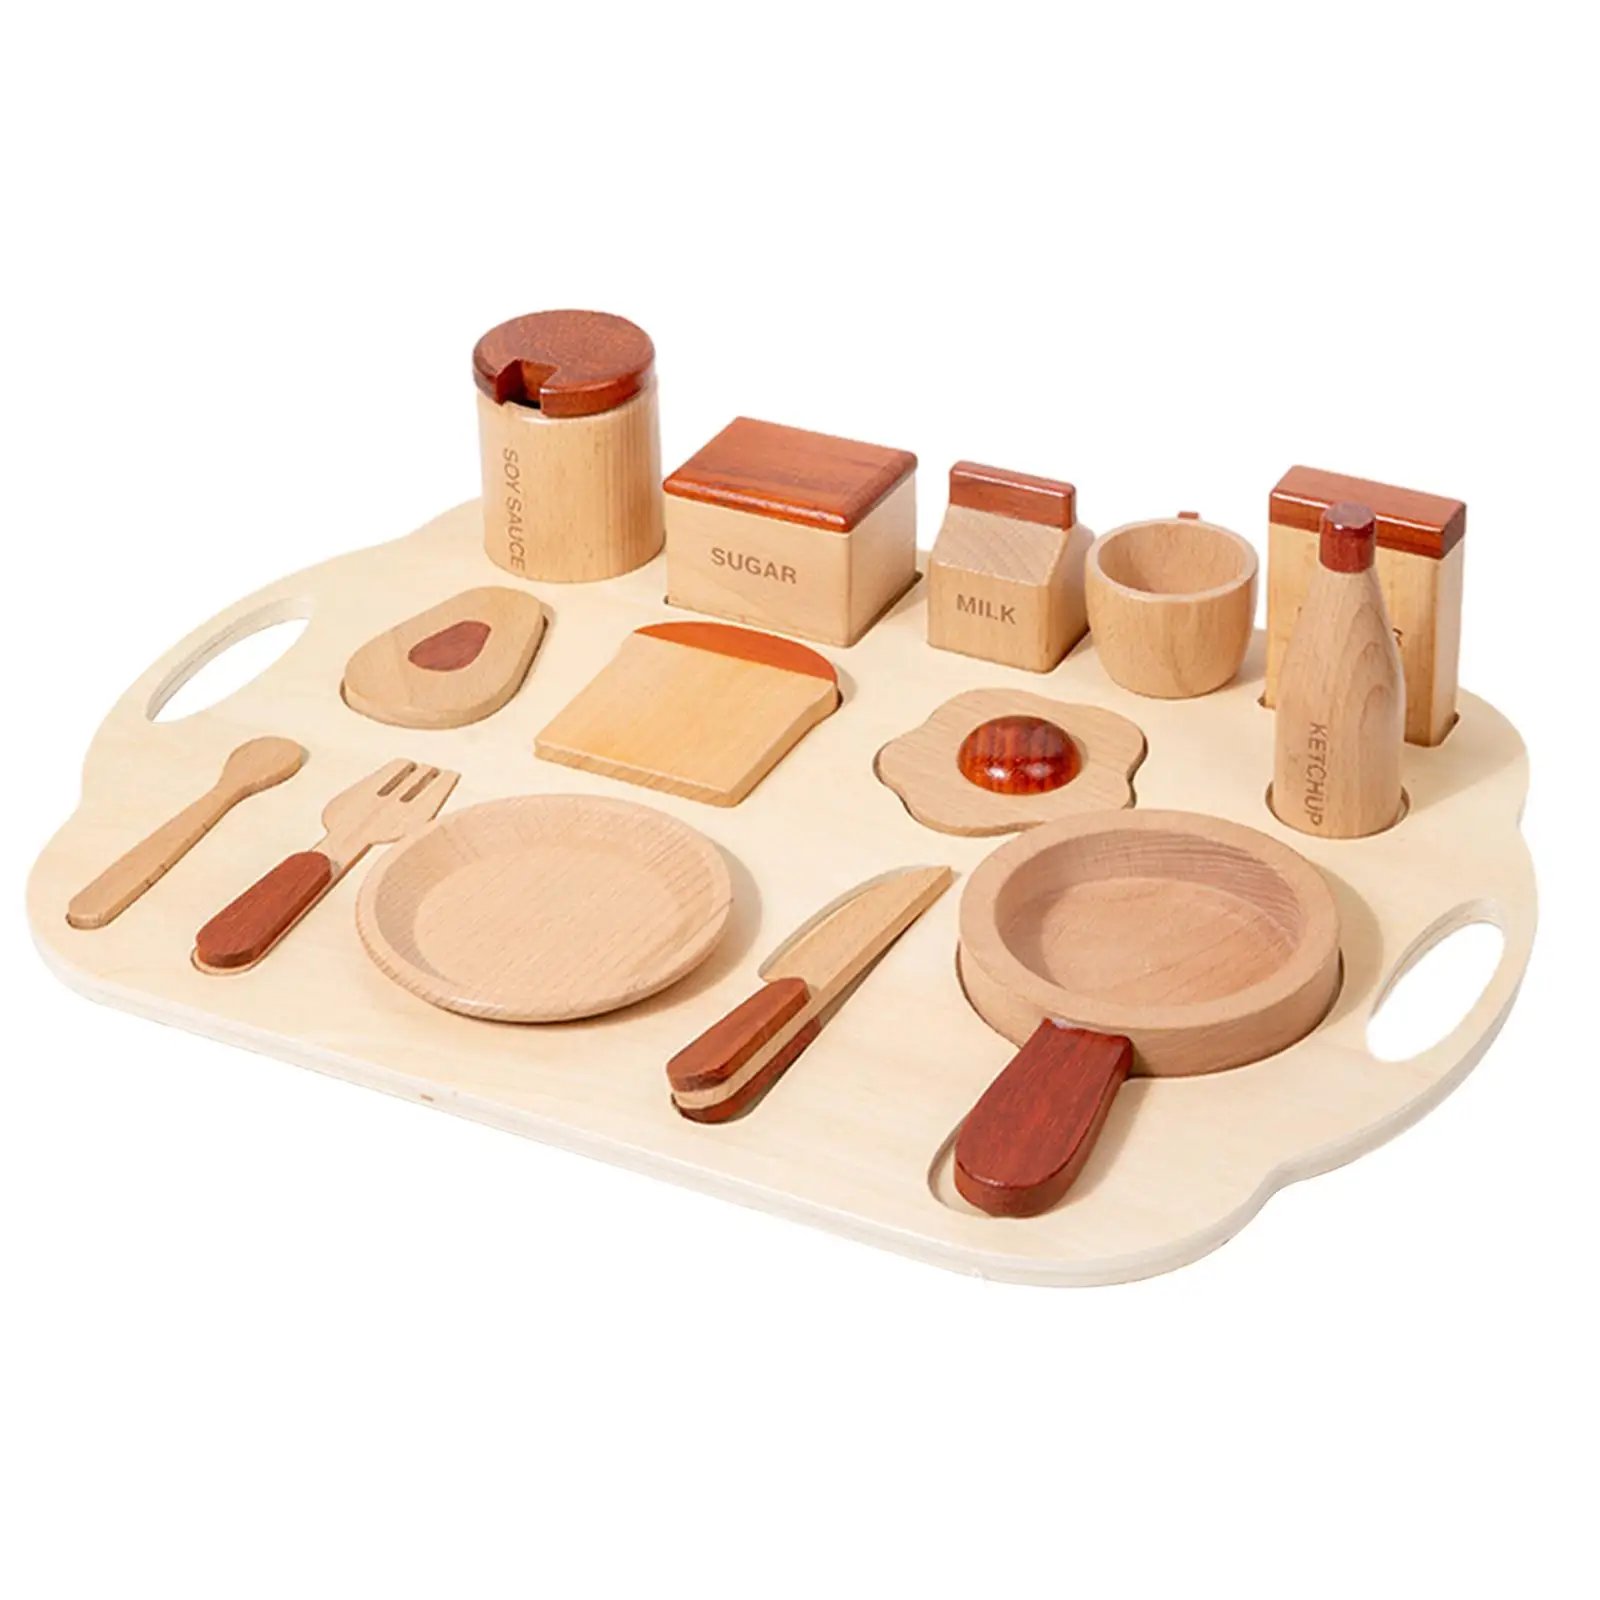 15x Kitchen Accessories Pretend Play Wooden Food Sets for Toddlers Children